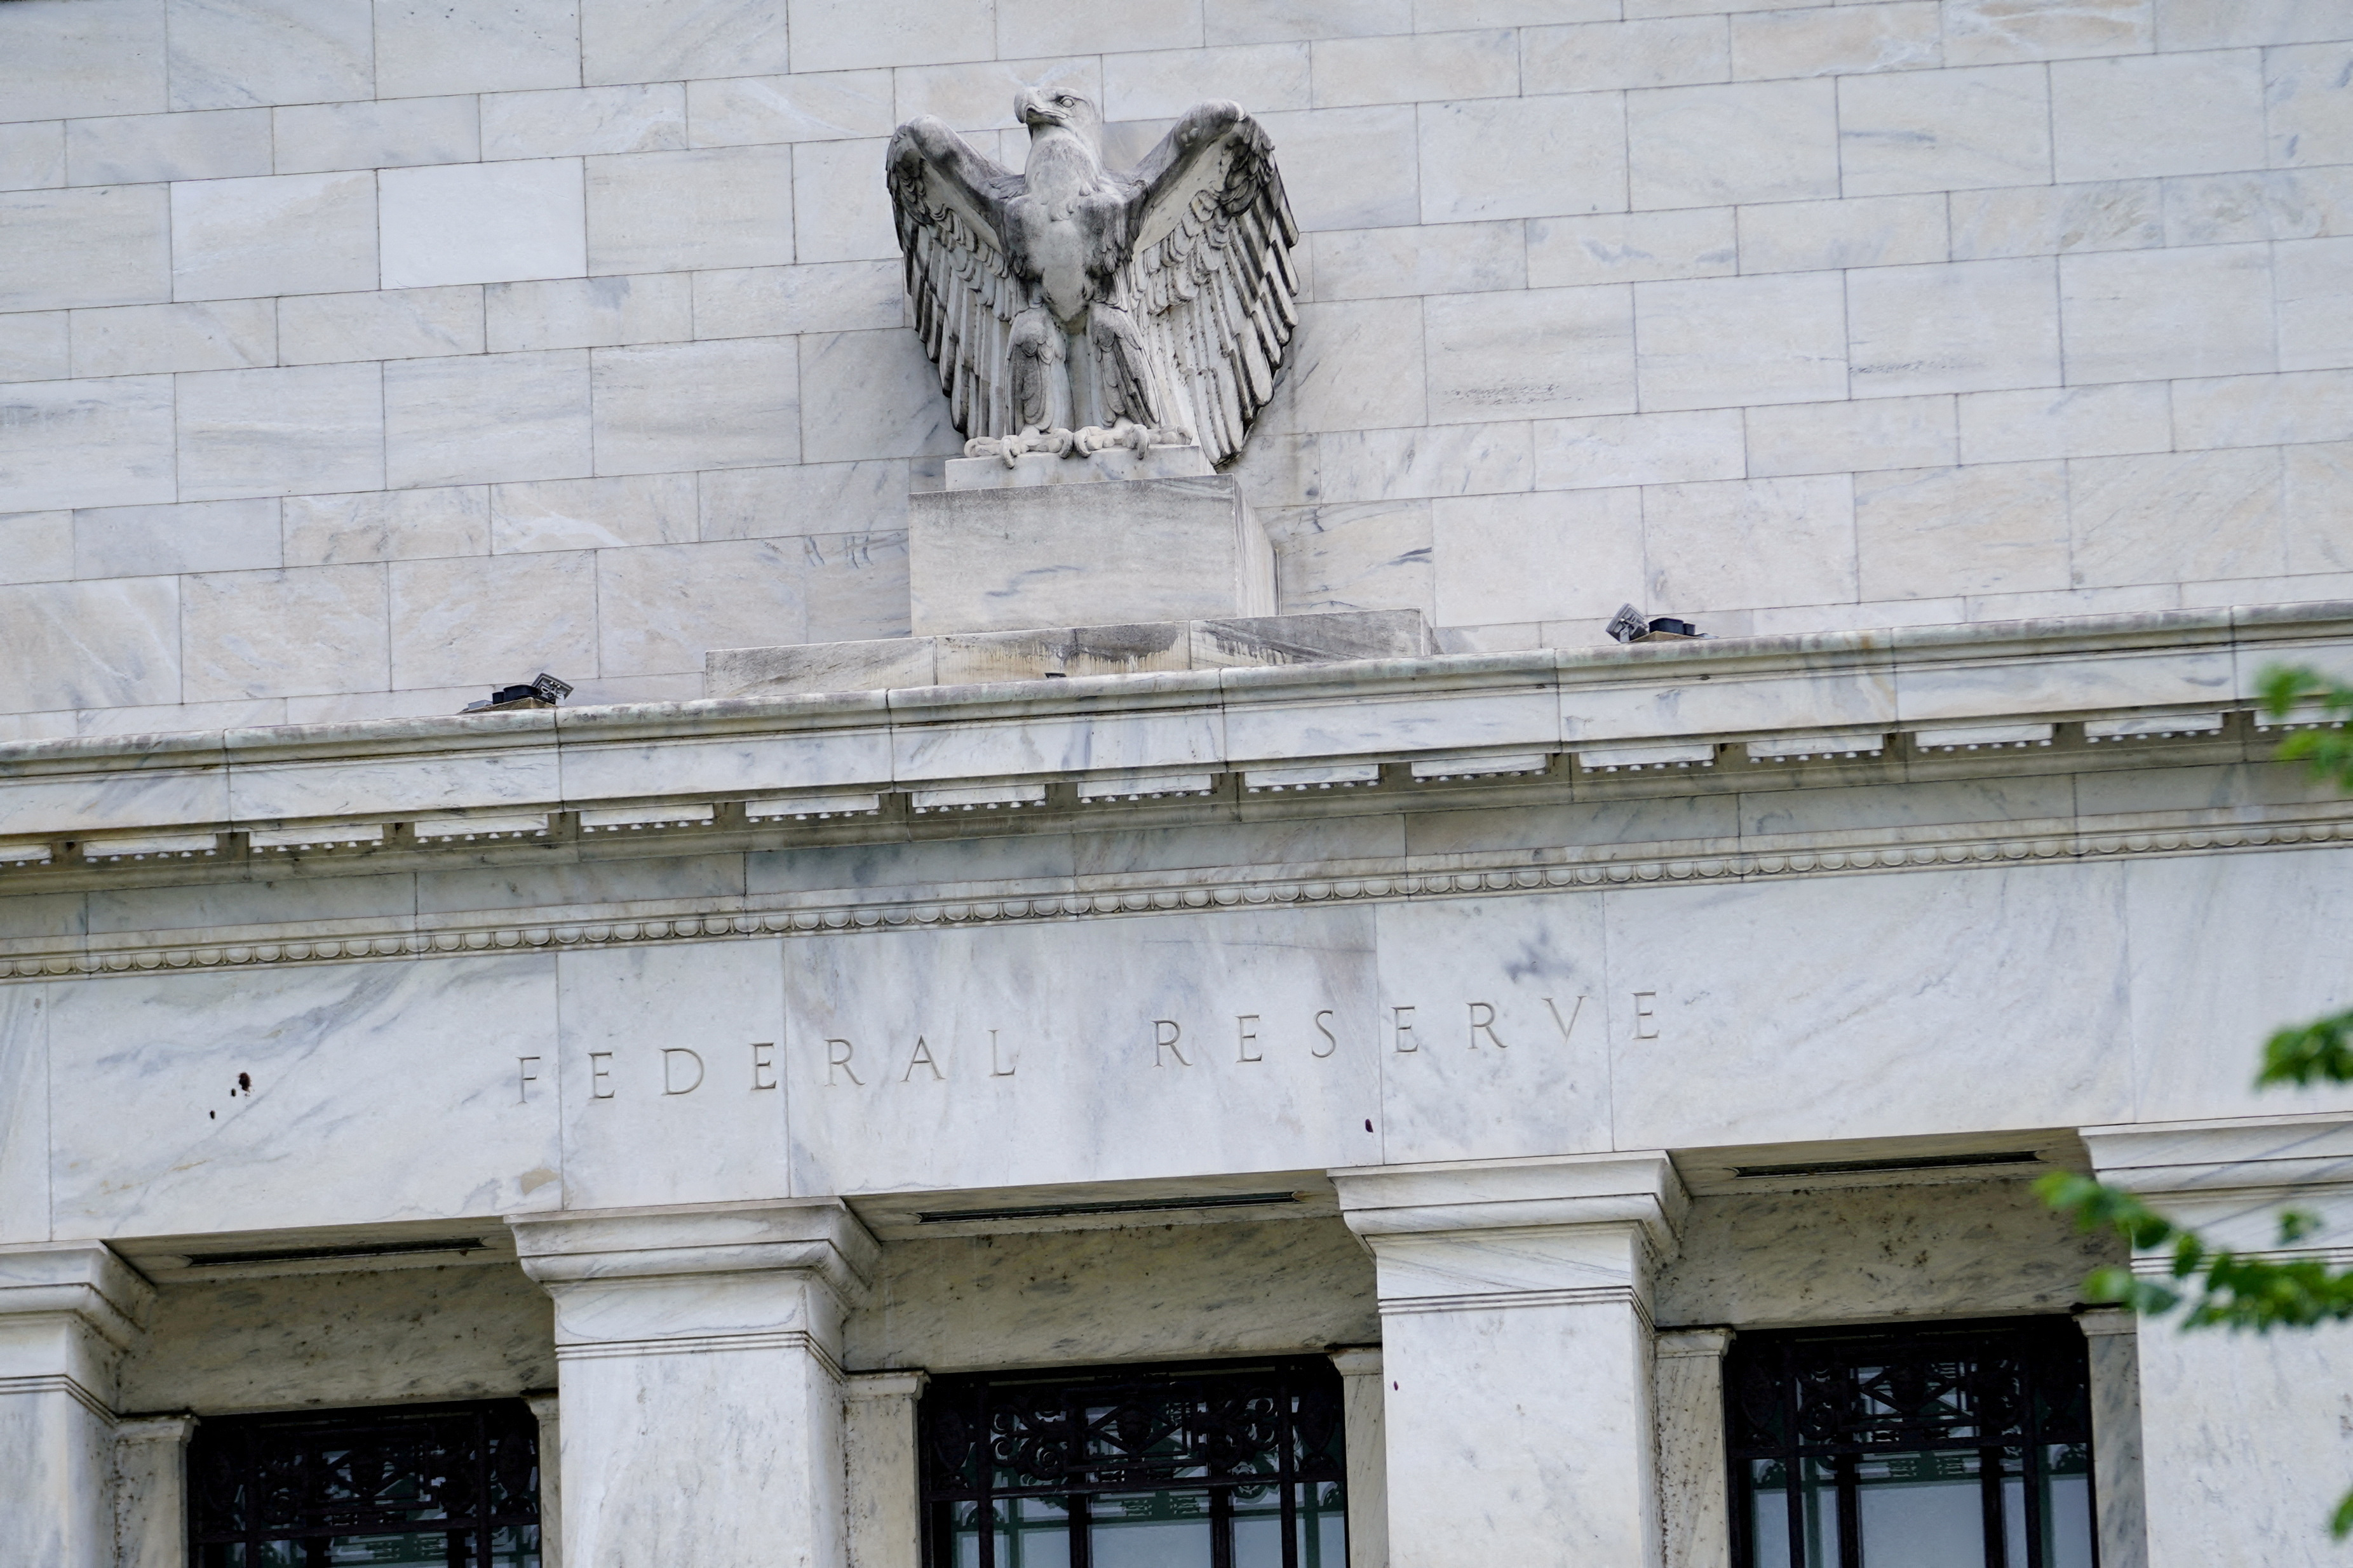 usnFILE PHOTO: Federal Reserve Board Building in Washington